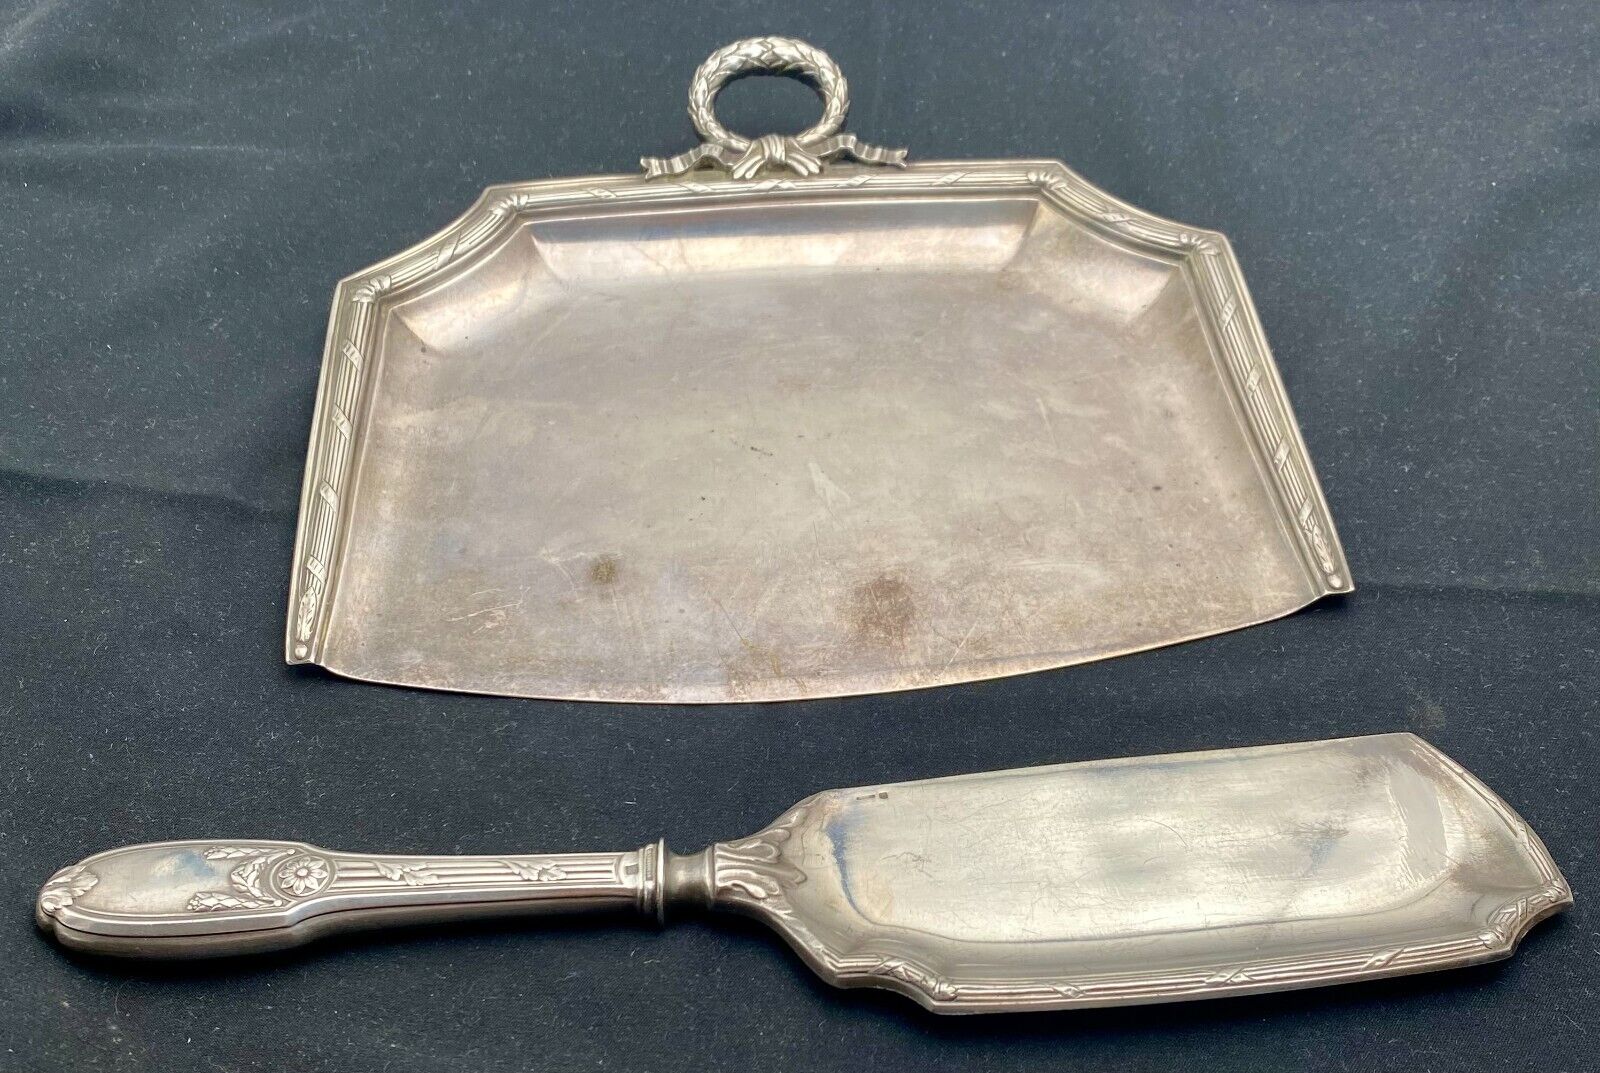 VTG SET OF CHRISTOFLE SILVER PLATED CRUMB TRAY & CRUMBER EMPIRE STYLE c1950 g